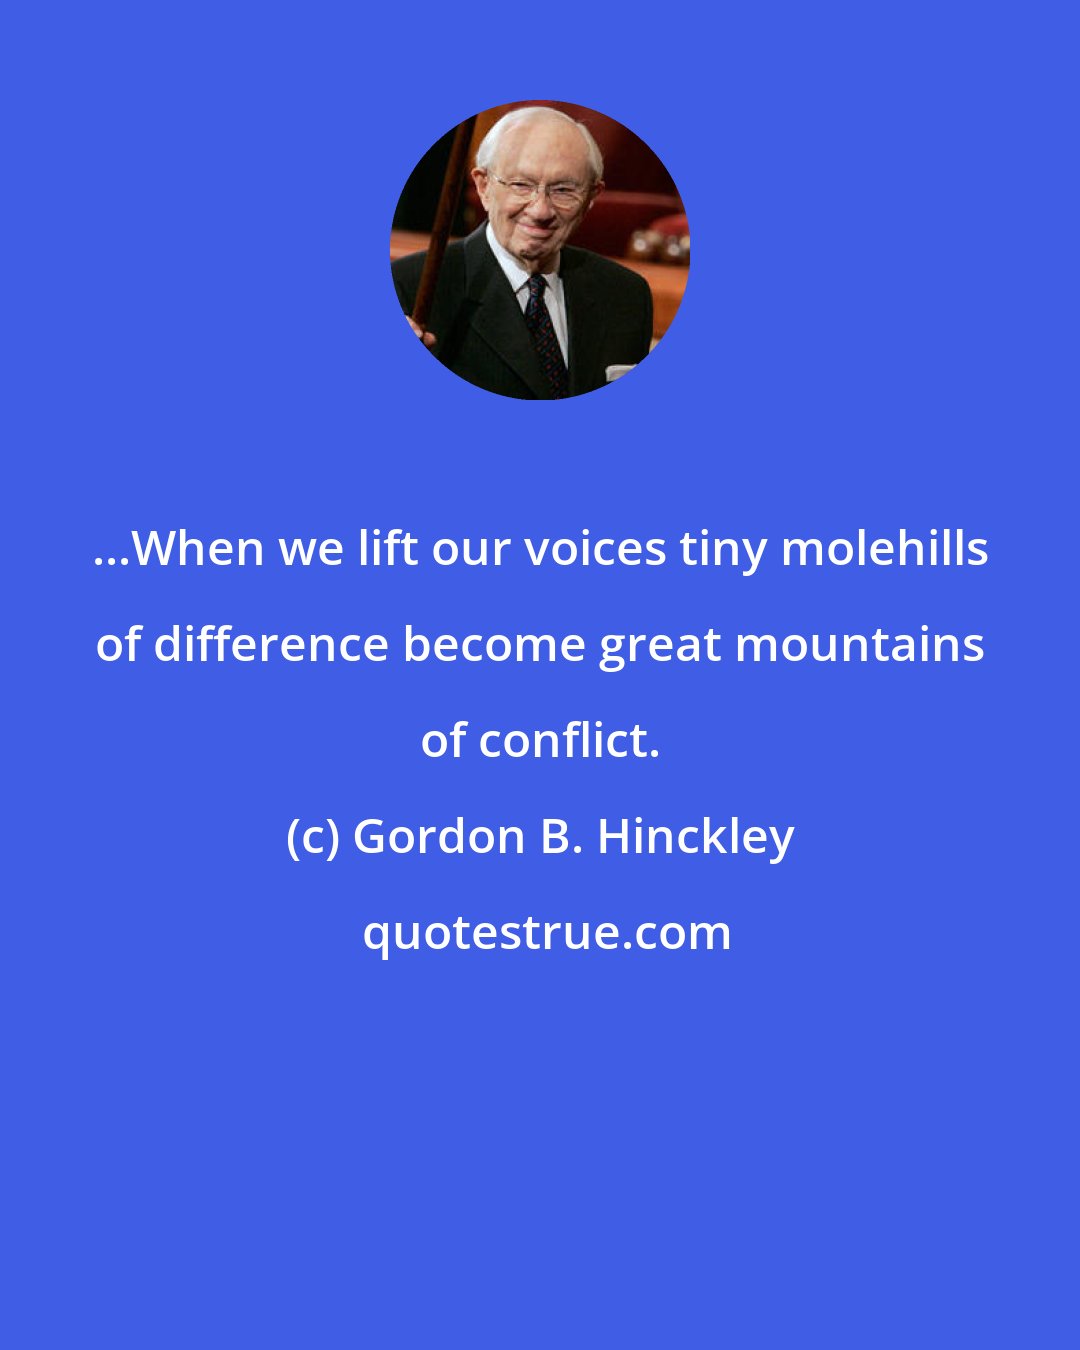 Gordon B. Hinckley: ...When we lift our voices tiny molehills of difference become great mountains of conflict.